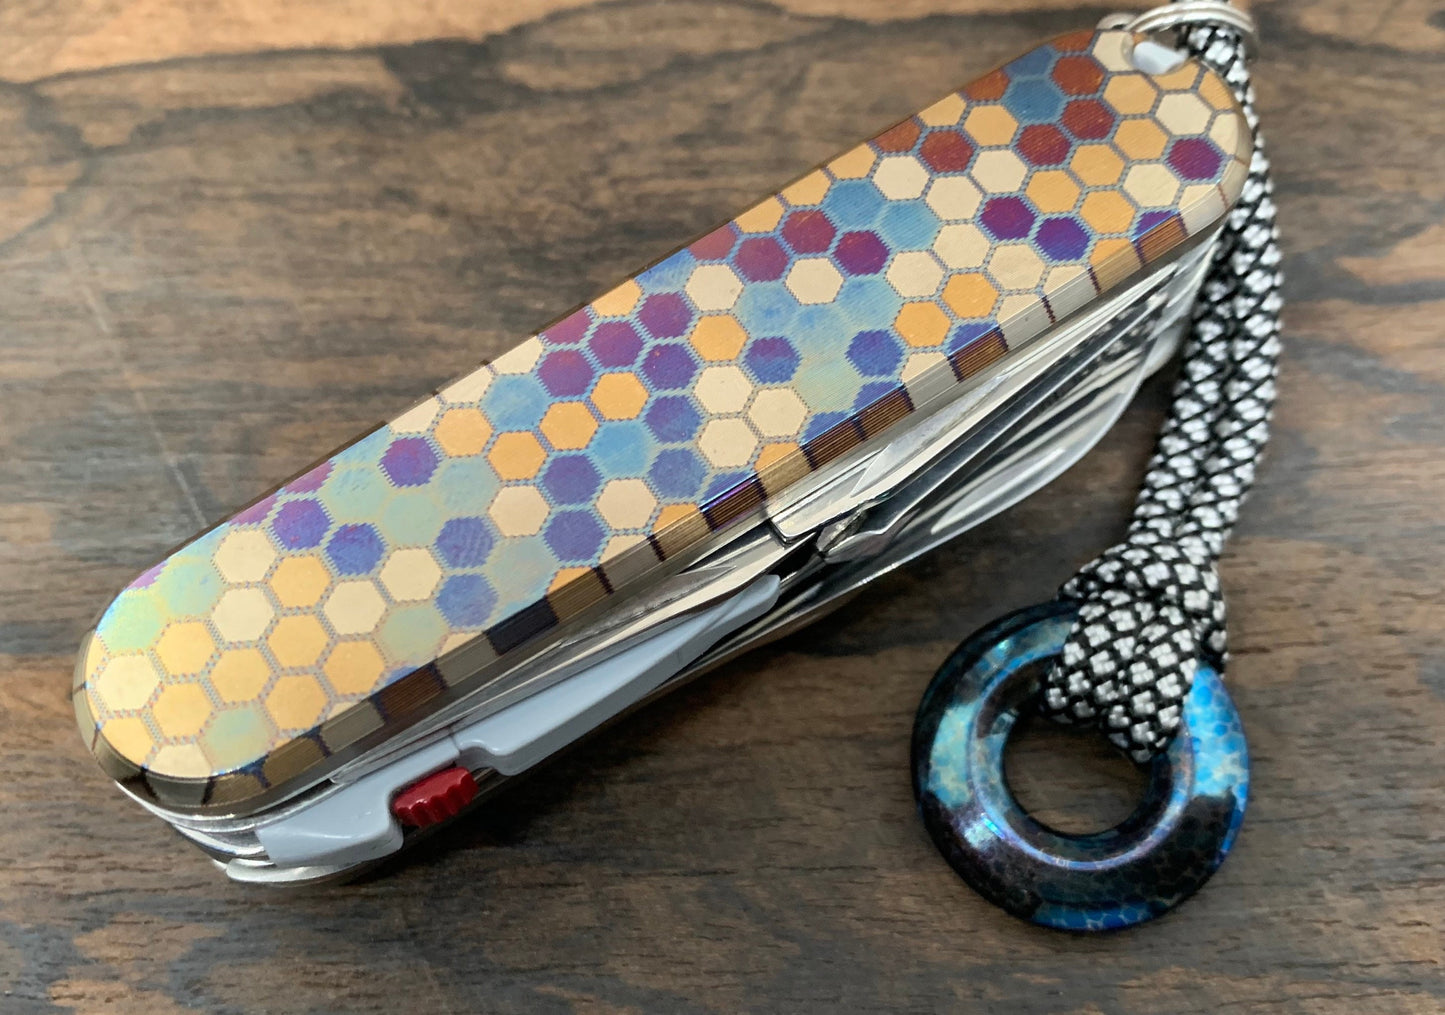 91mm heat ano engraved Honeycomb Titanium Scales for Swiss Army SAK